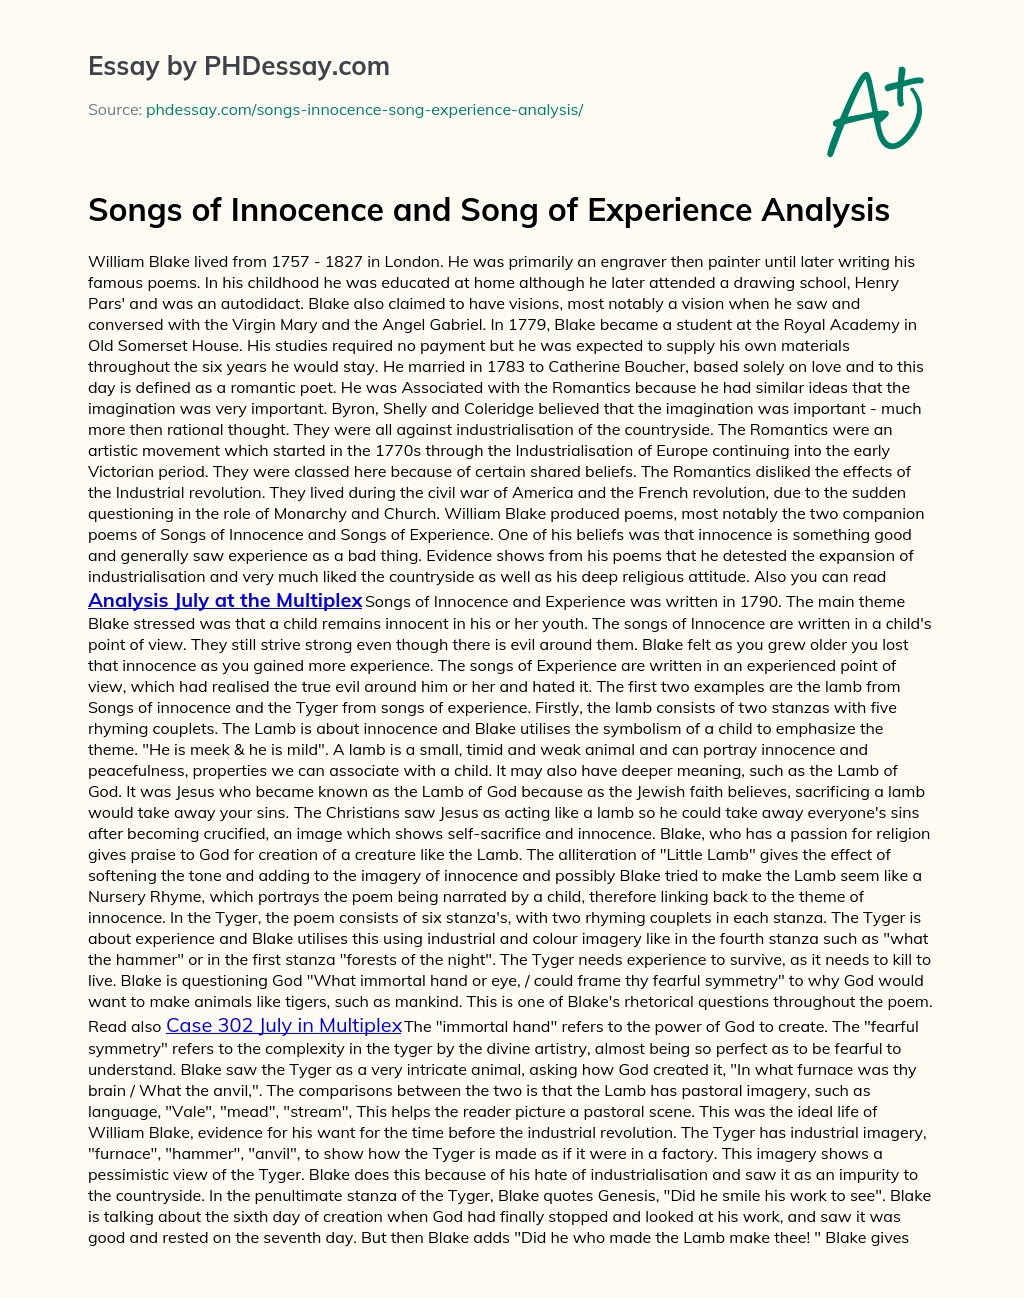 Songs of Innocence and Song of Experience Analysis essay